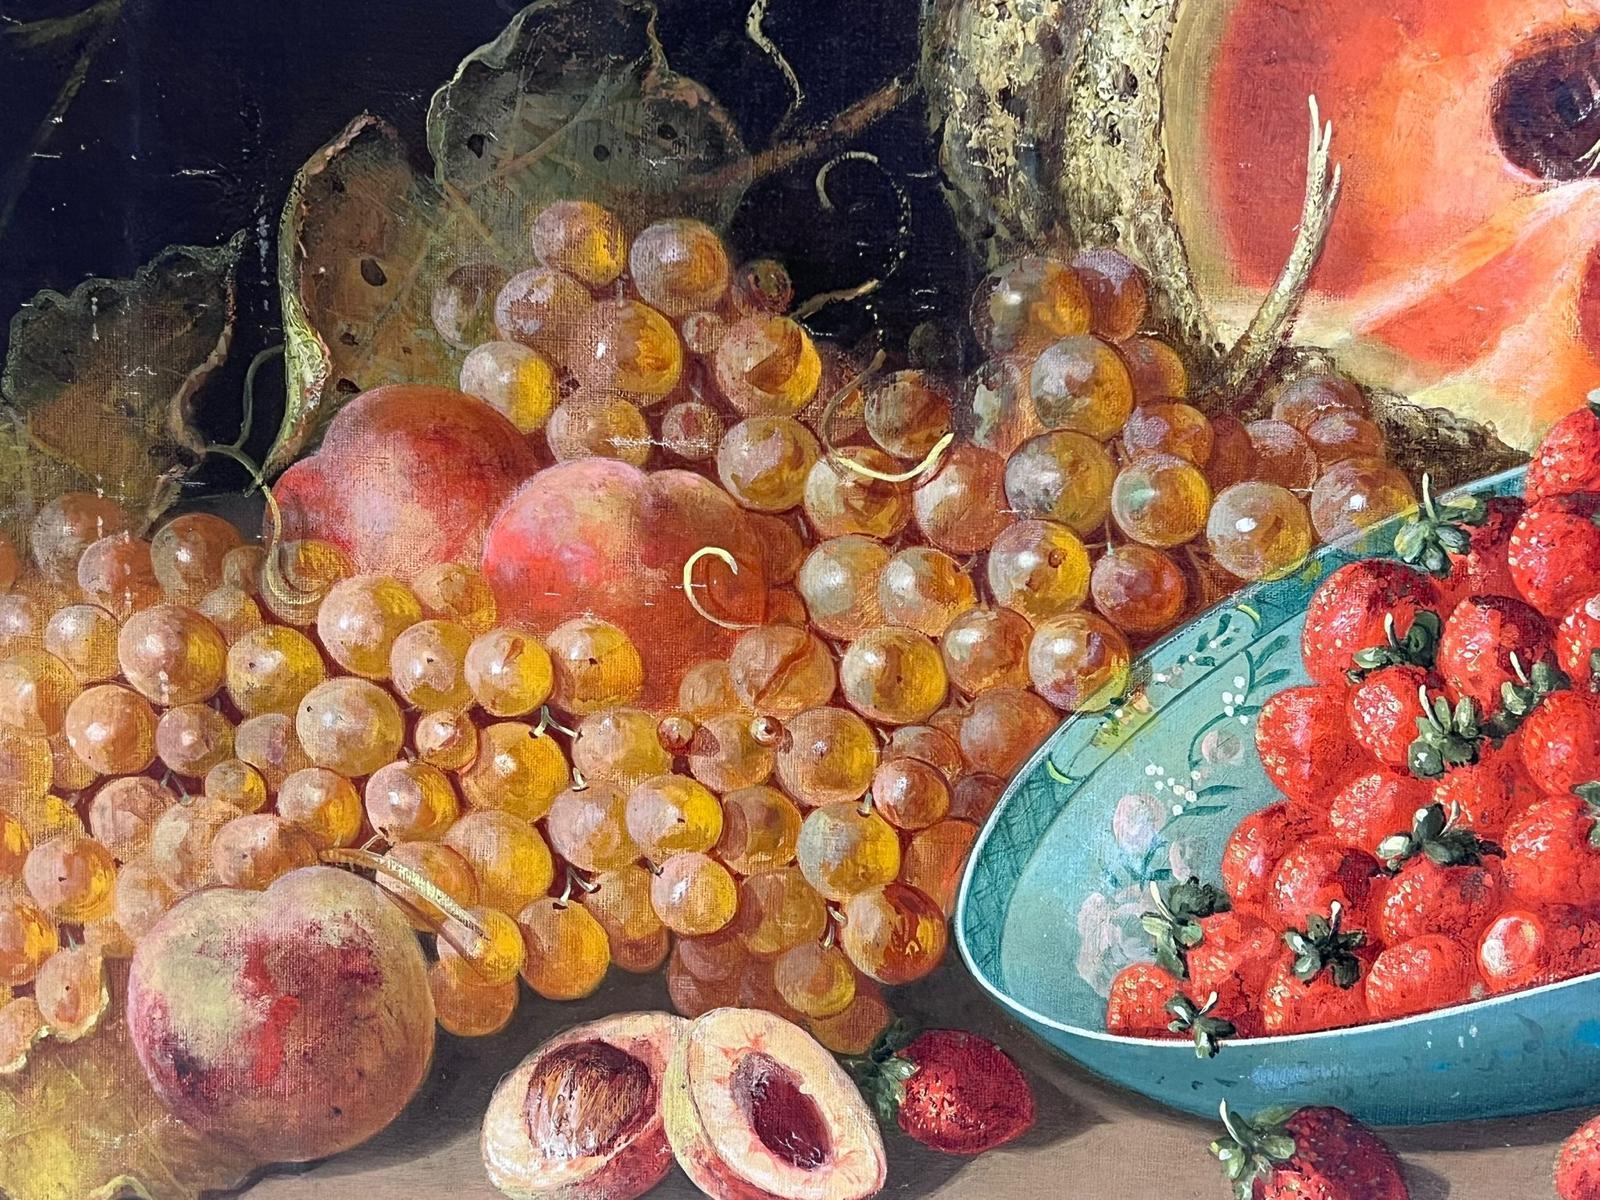 Still Life of Fruit
French School, mid 19th century
indistinctly signed lower right corner
oil on canvas laid on board, framed
framed: 27 x 35 inches
board: 25 x 33 inches
provenance: private collection, France
condition: very good and sound